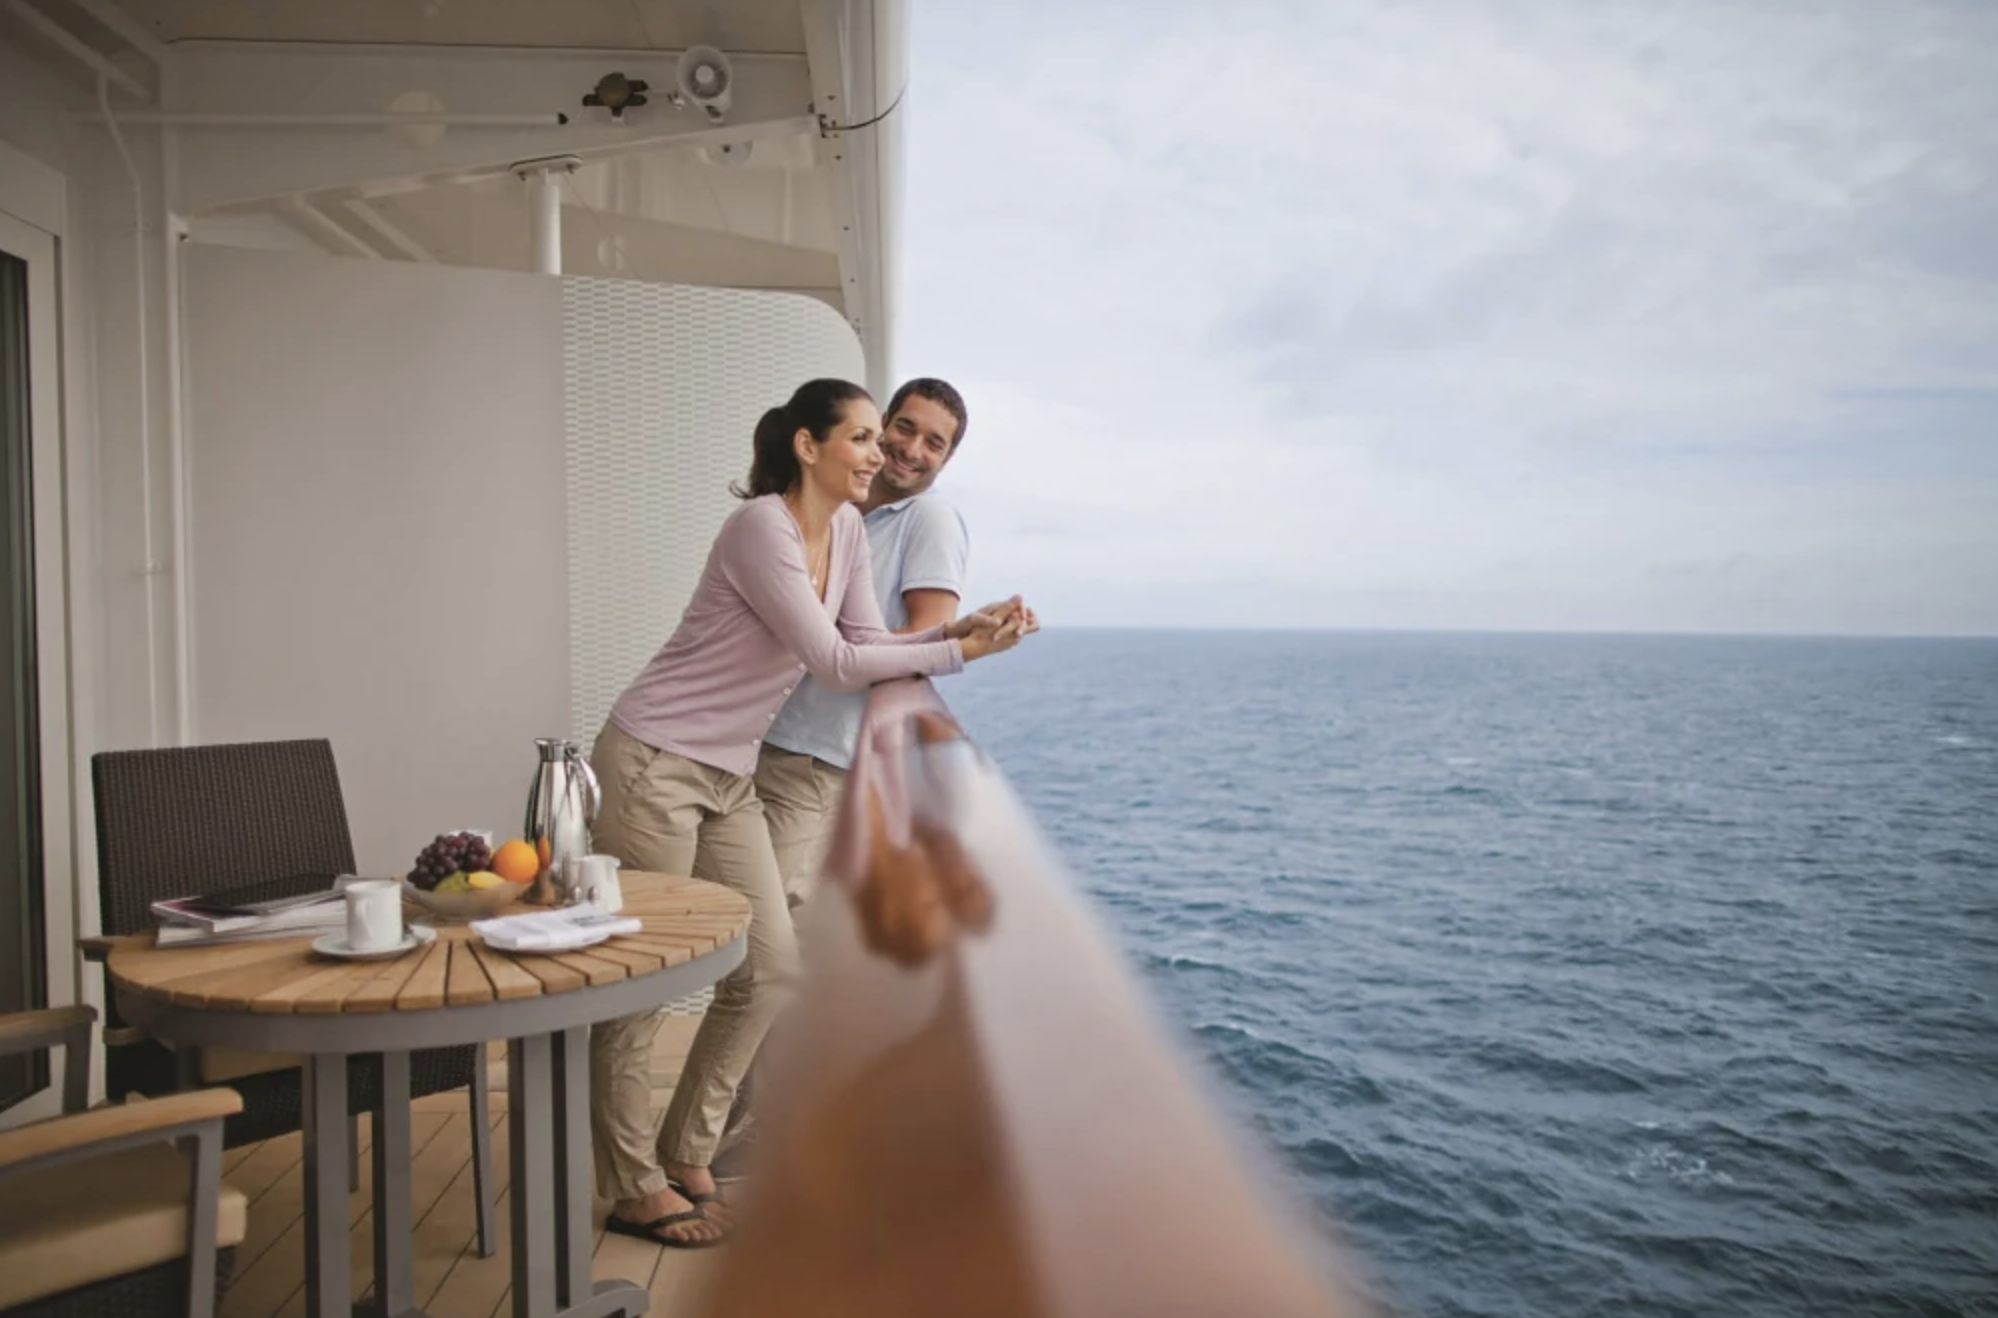 Worried about seasickness after two years of no cruising? Here are 10 ways to avoid it